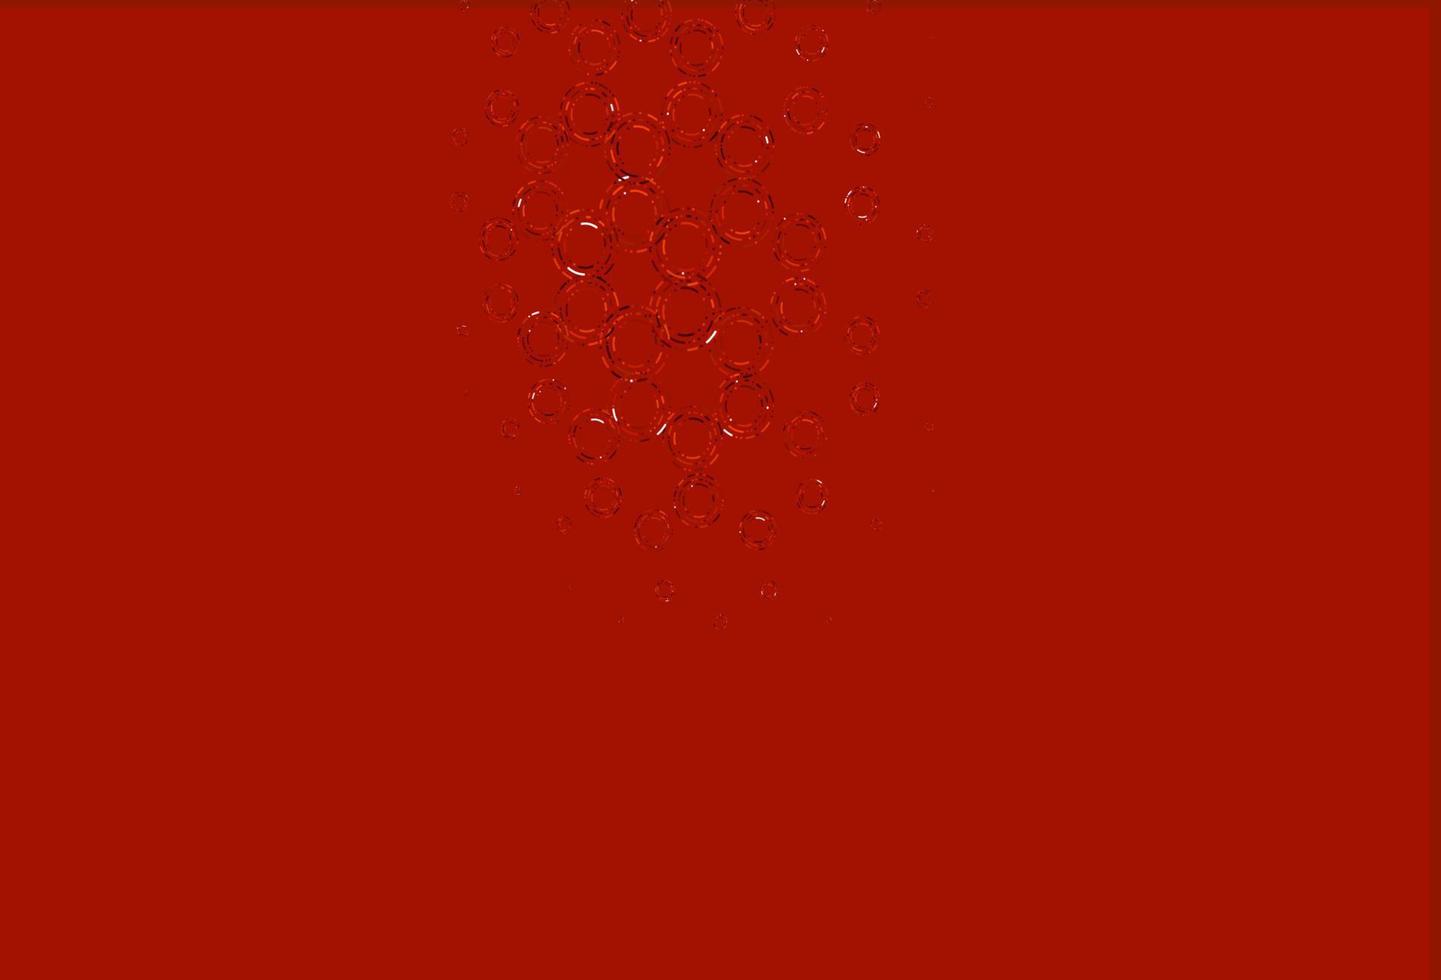 Light red vector backdrop with dots.